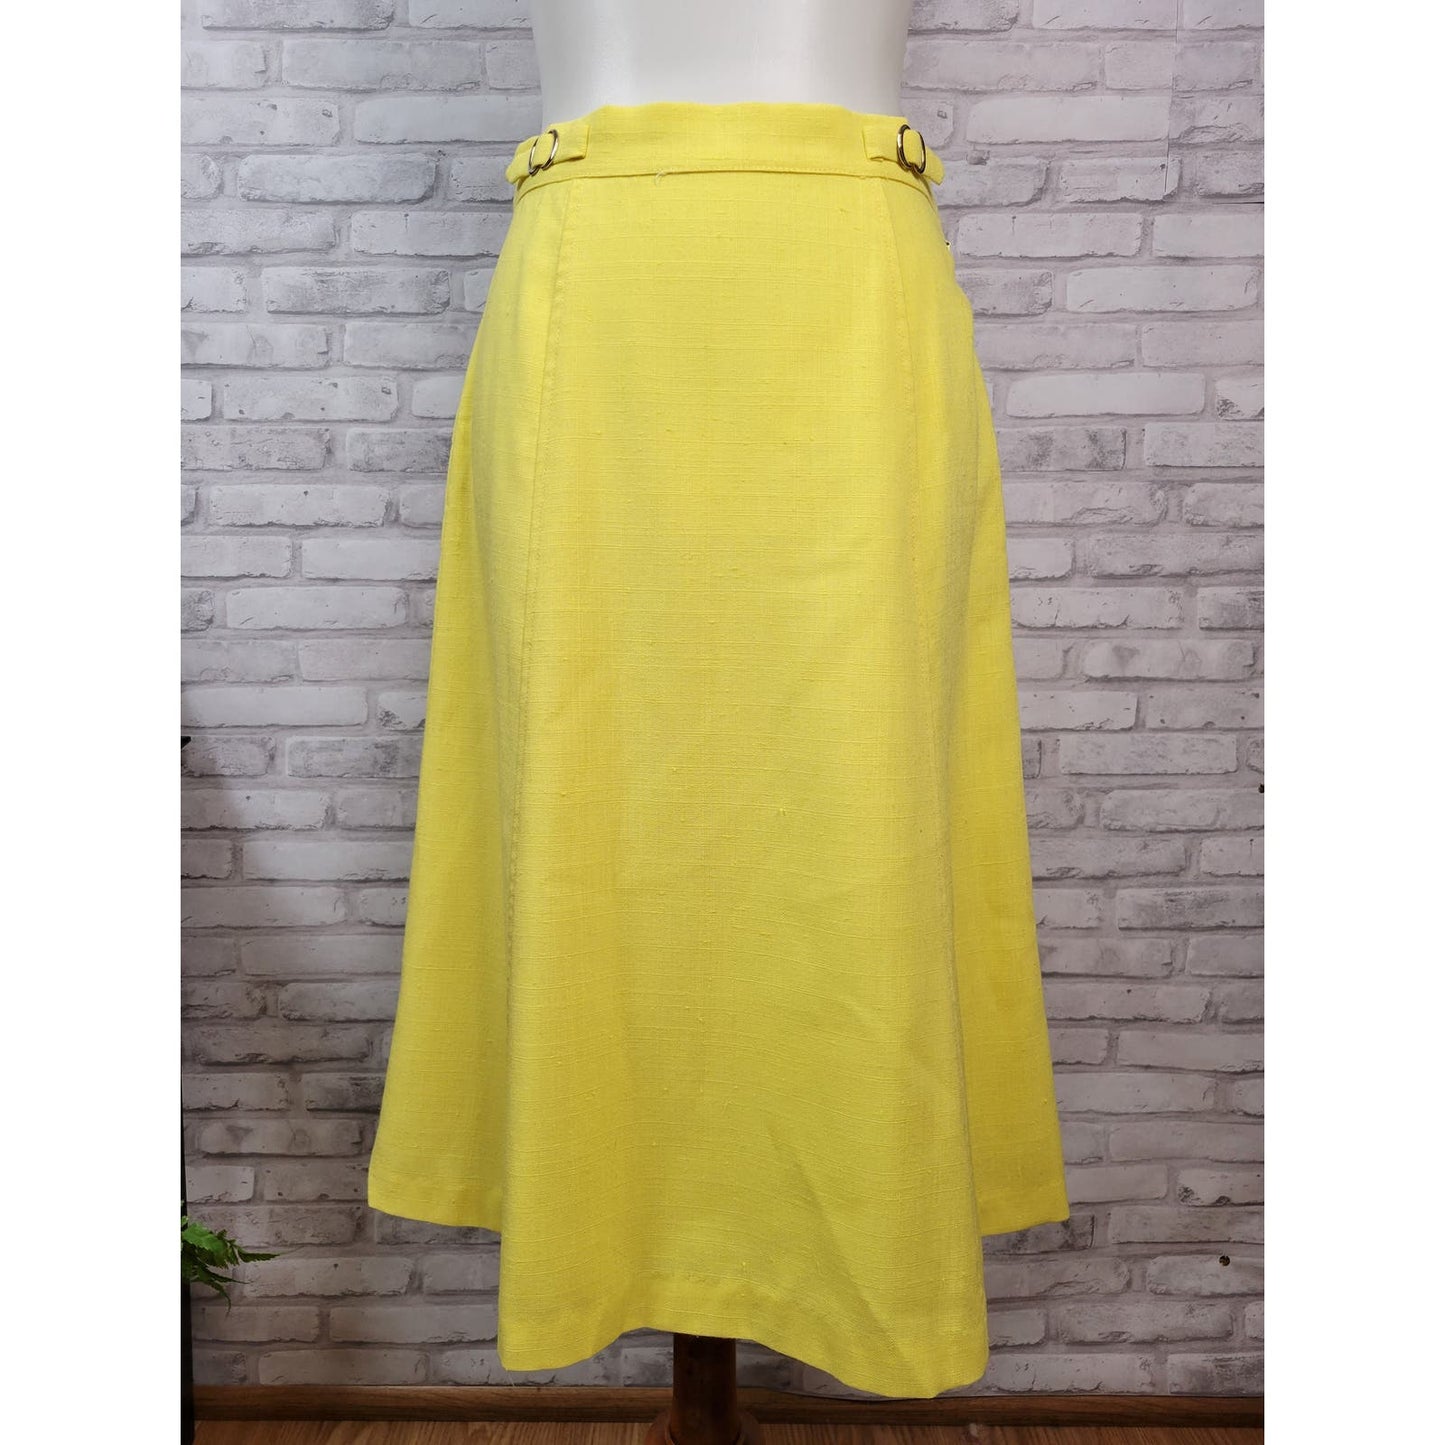 1960s A-line knee-length skirt sunny yellow cotton blend with buckle detail 28-inch waist